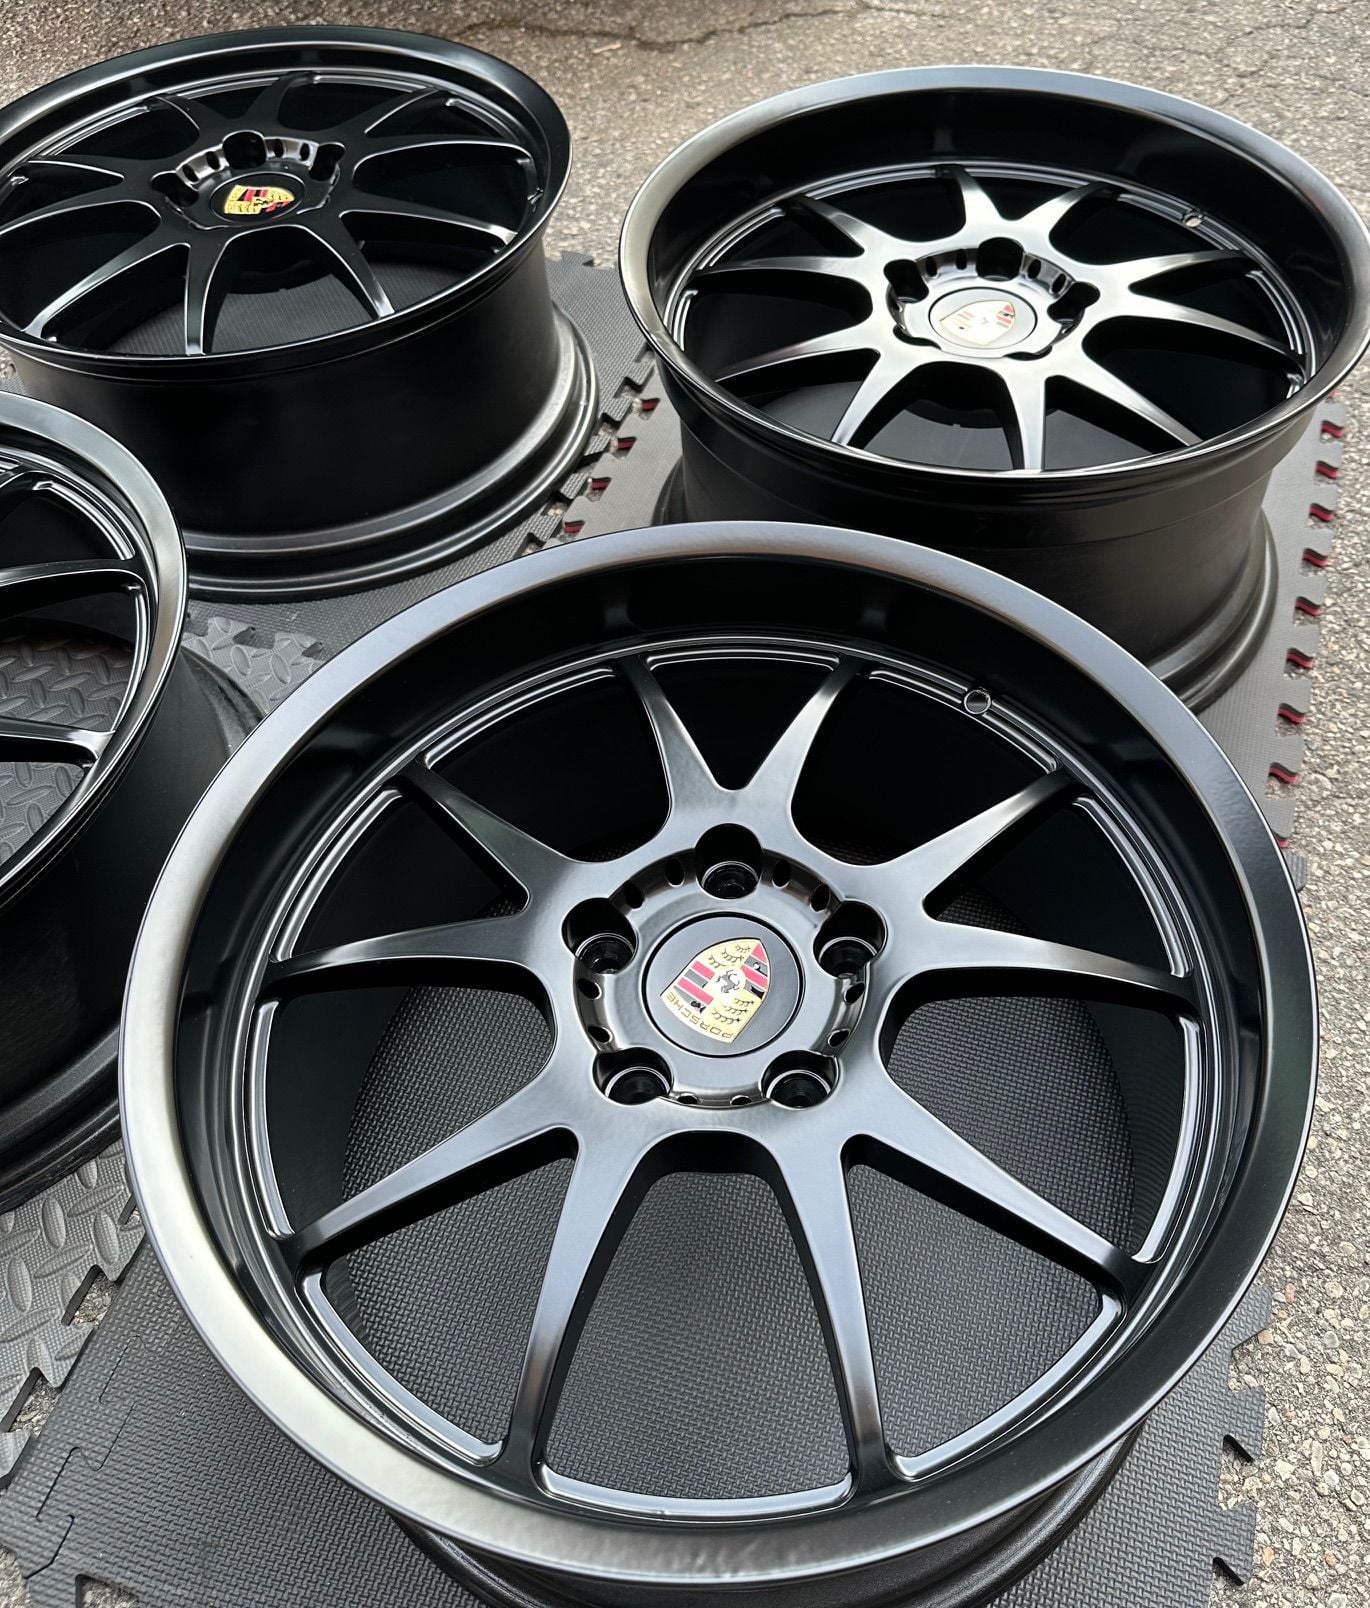 2016 Porsche 911 - 19" Forged Wheels for Cayman / Boxster - Accessories - $2,350 - Niagara Falls, NY 14304, United States